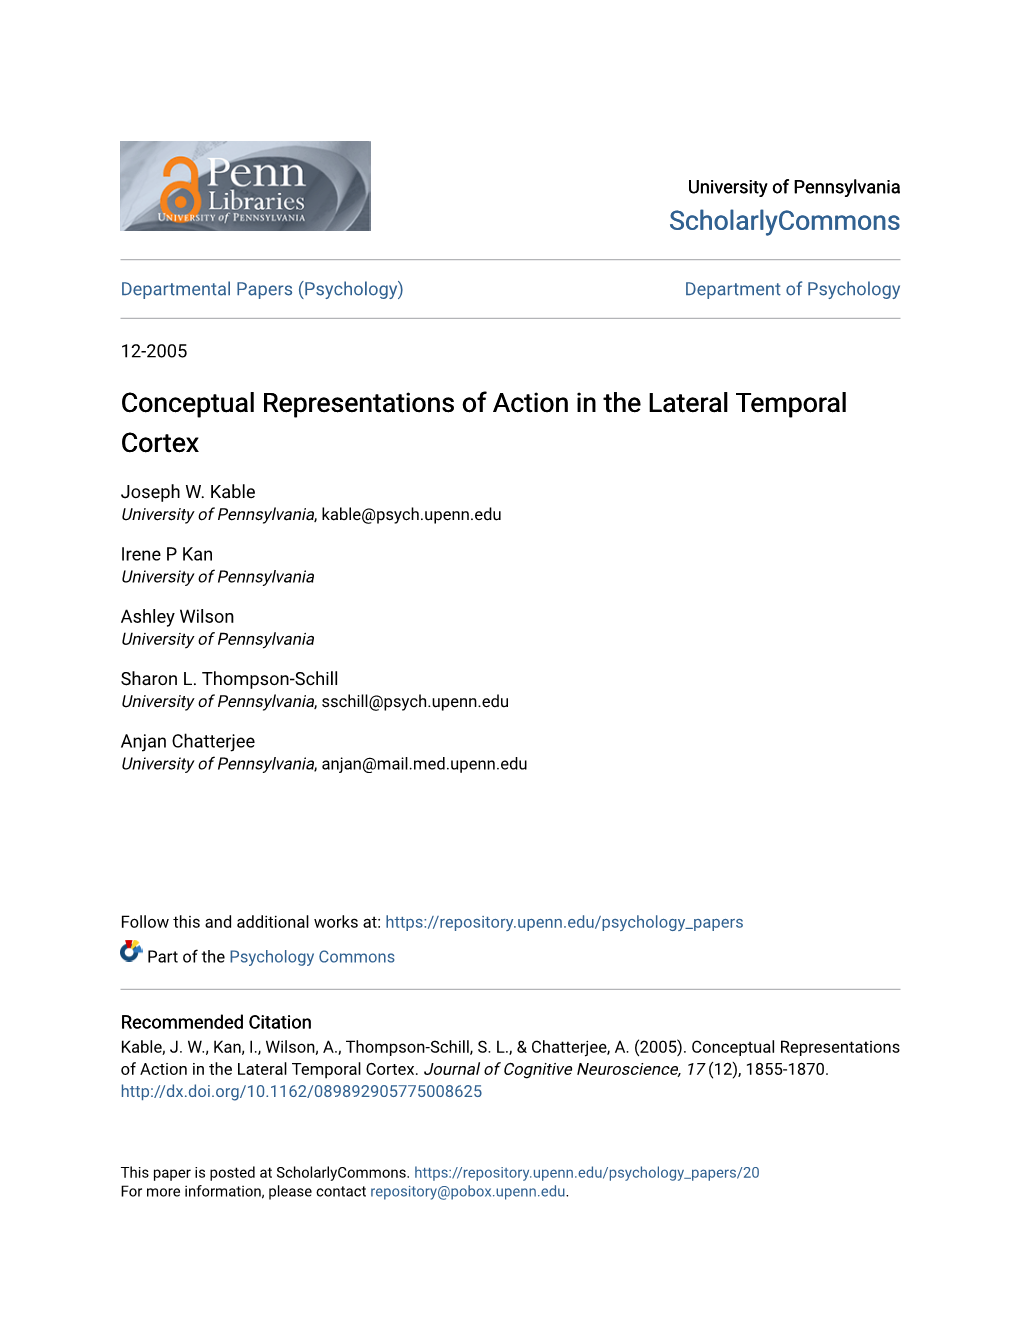 Conceptual Representations of Action in the Lateral Temporal Cortex